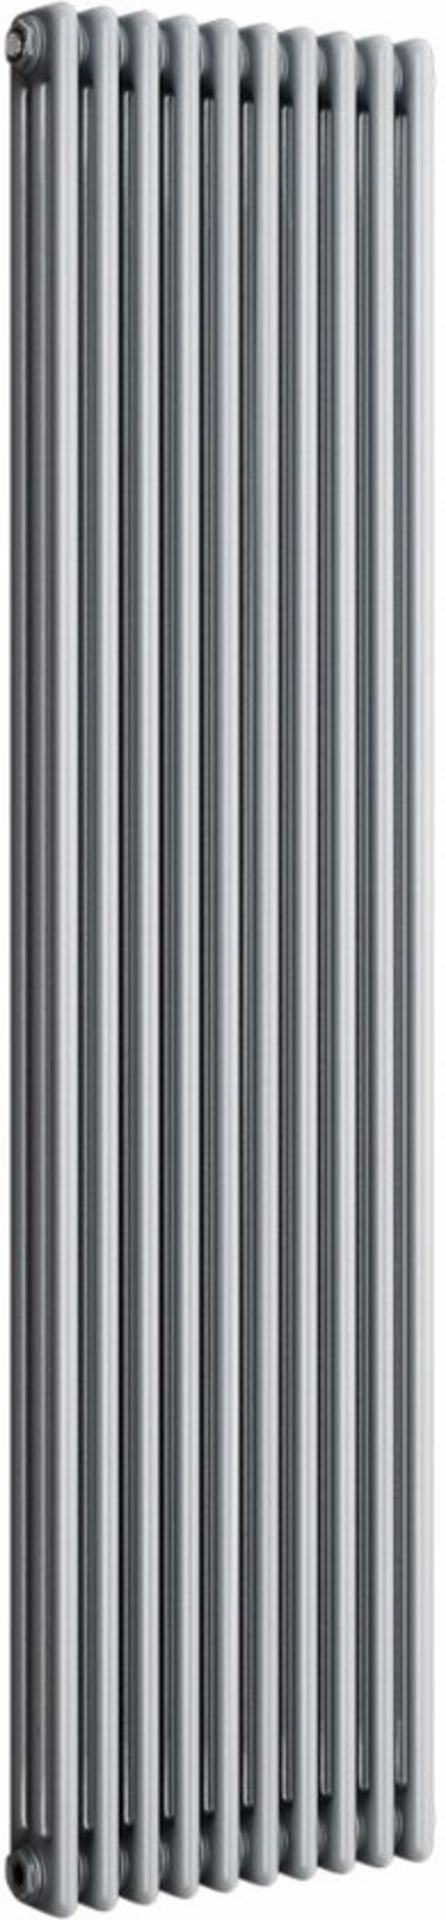 (PM23) 1800x468mm Earl Grey Triple Panel Vertical Colosseum Traditional Radiator. RRP £512.99.... - Image 3 of 3